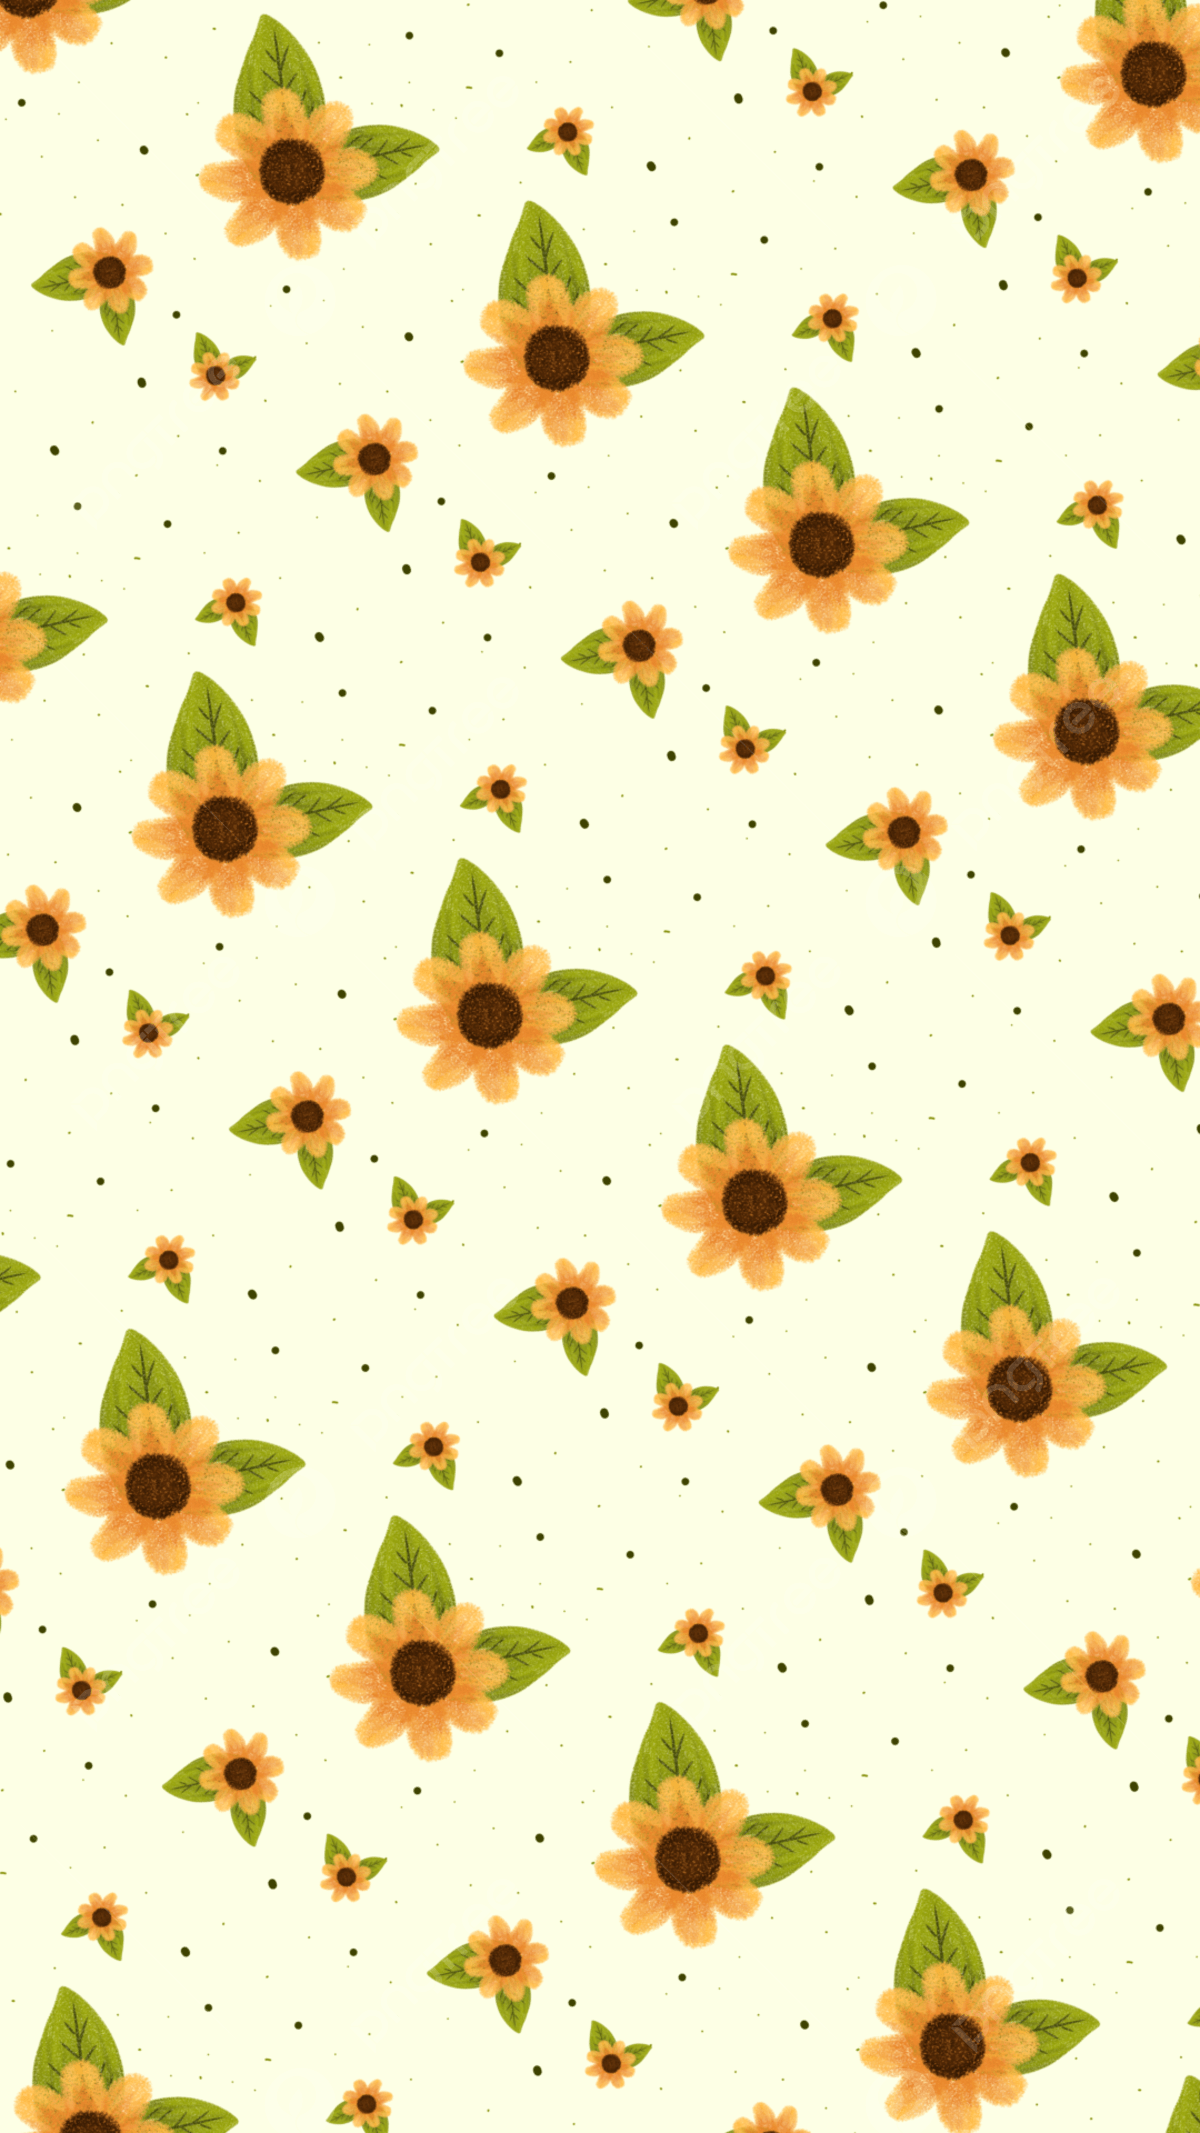 A yellow wallpaper with sunflowers and green leaves. - Sun